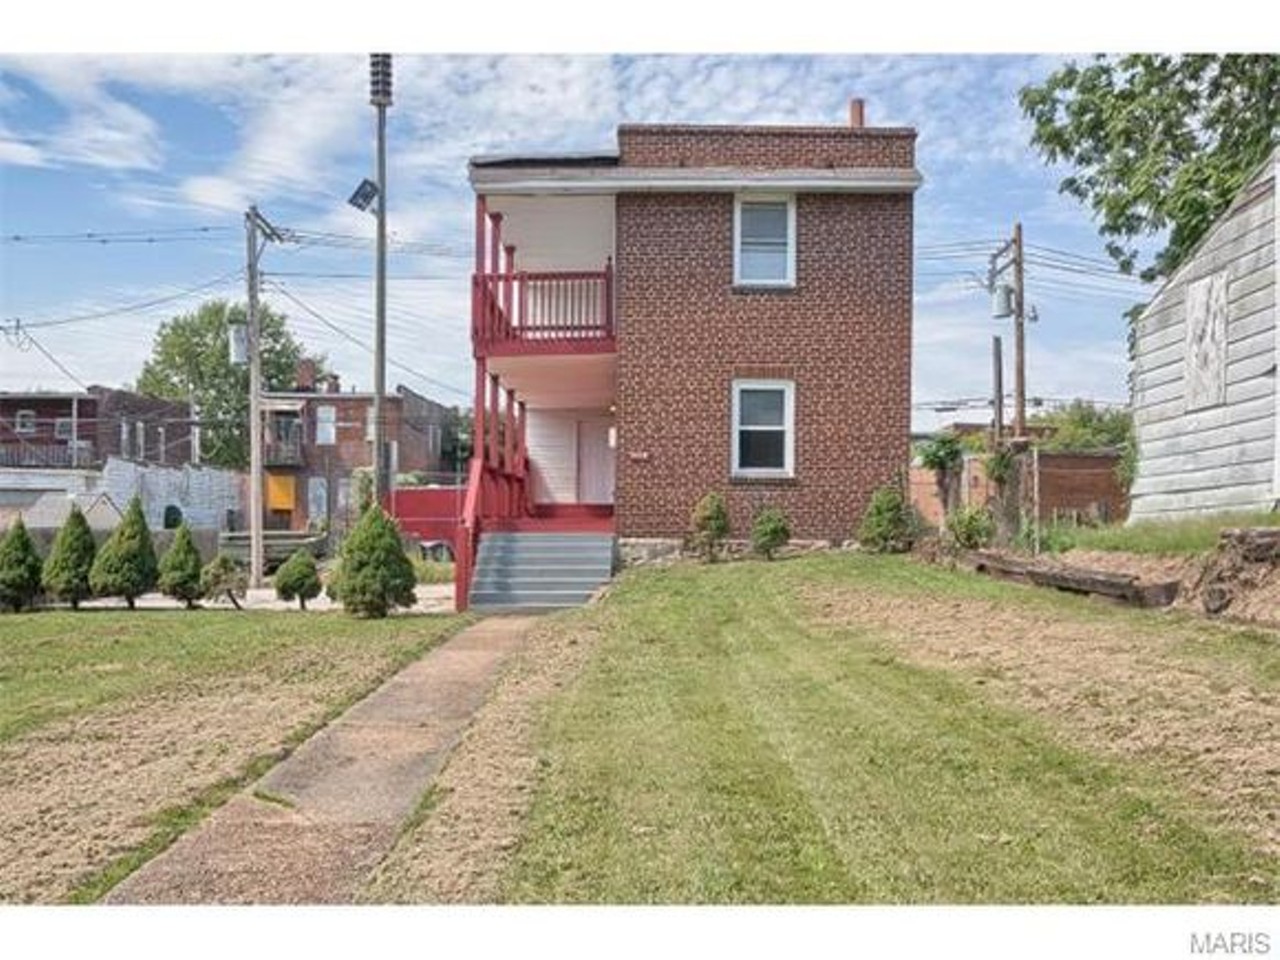 This 116-year-old home at 2915 Indiana is 1,590 square feet with 3 beds and baths for $129,900.